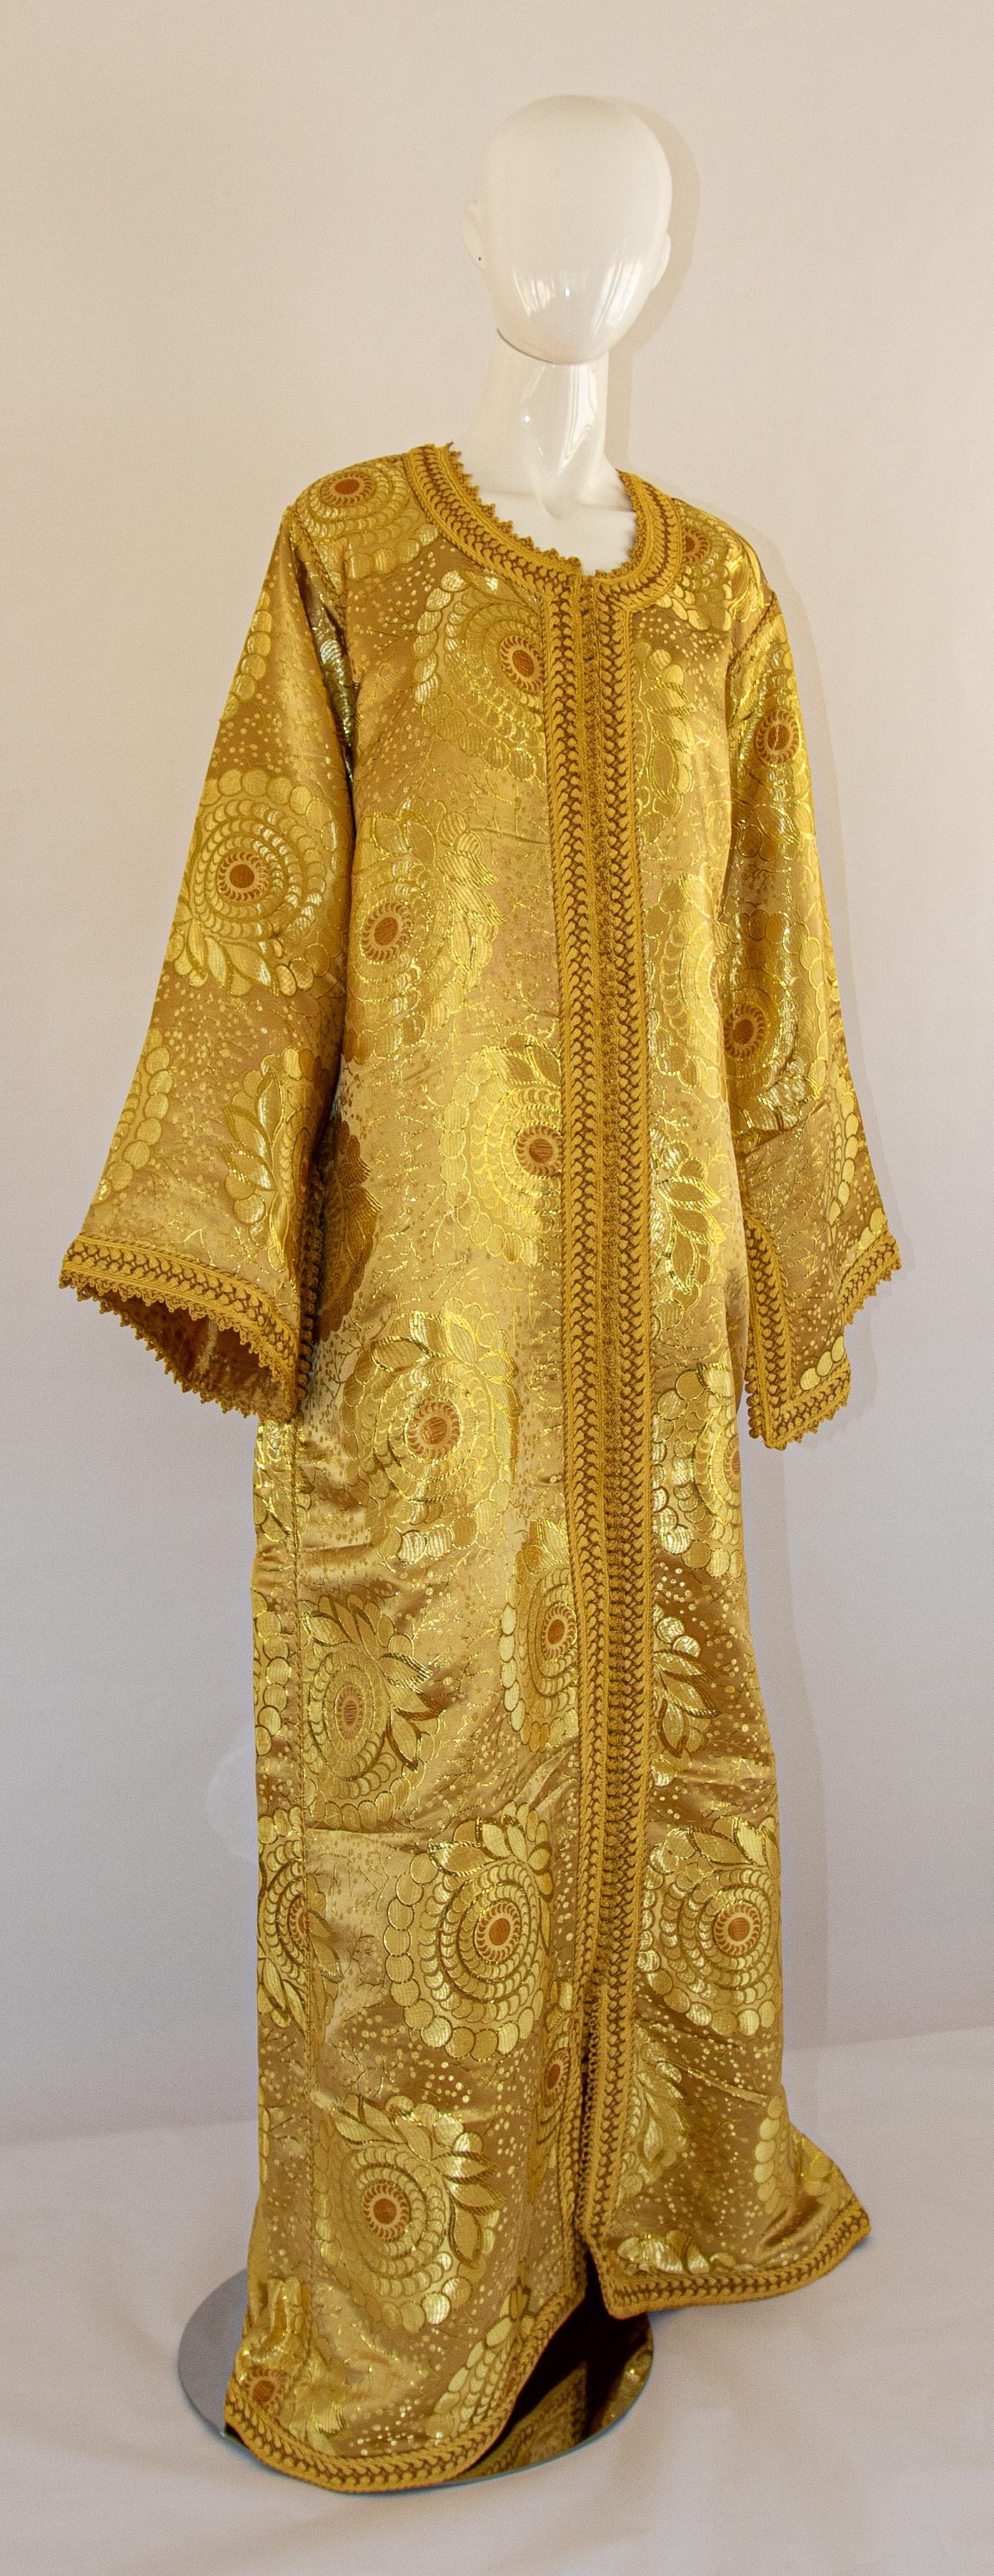 Moroccan Vintage Caftan Gown in Gold Brocade Maxi Dress Kaftan Size L to XL For Sale 5